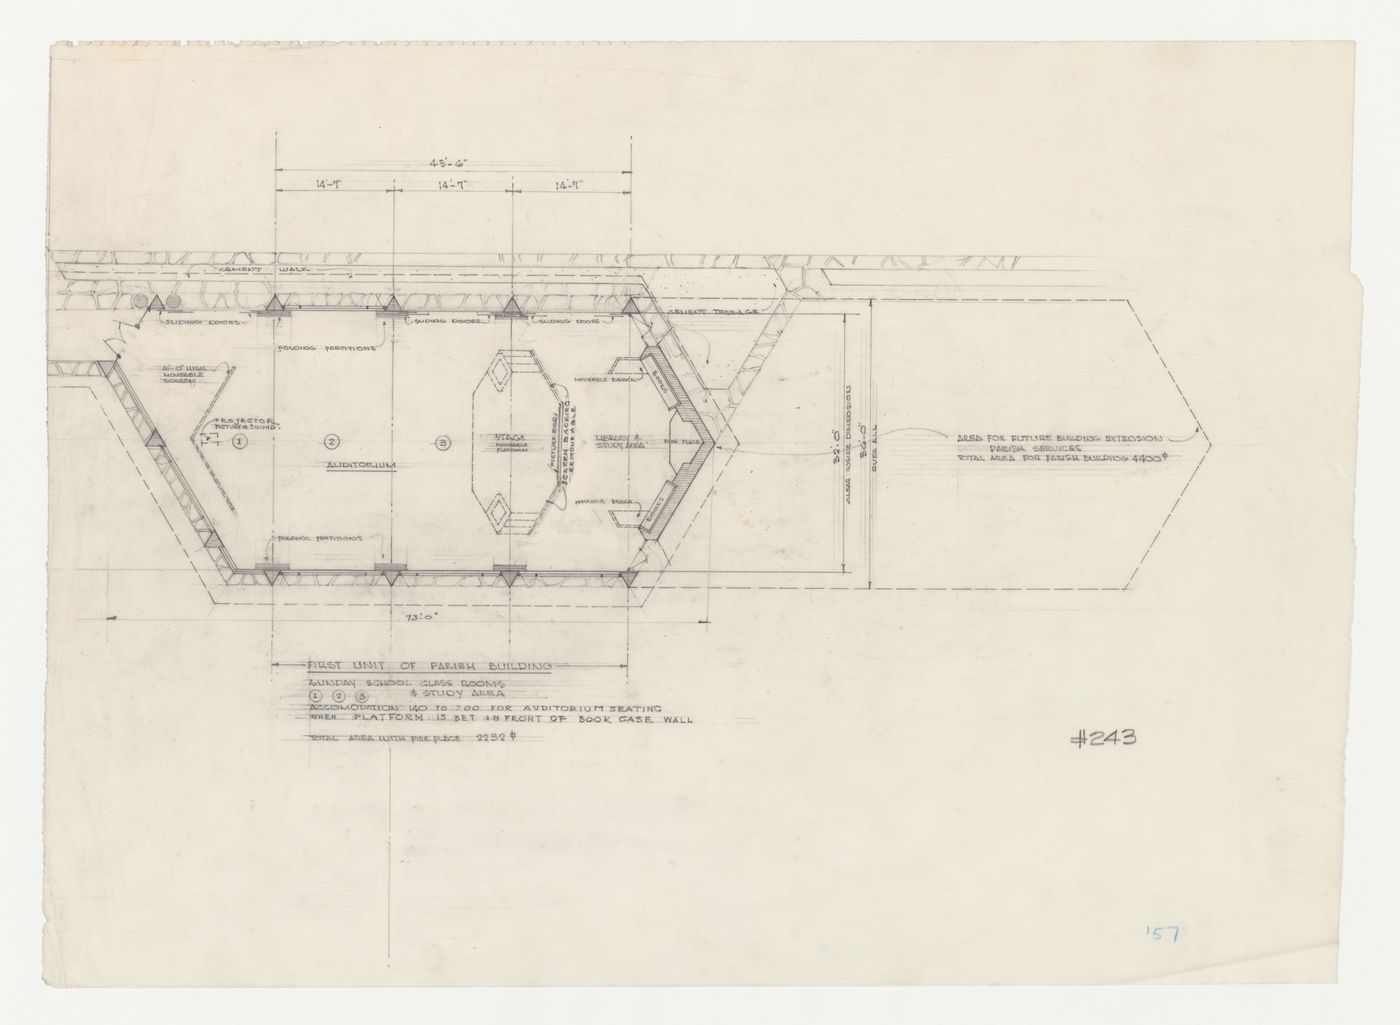 Wayfarers' Chapel, Palos Verdes, California: Plan for parish house to be constructed in two phases